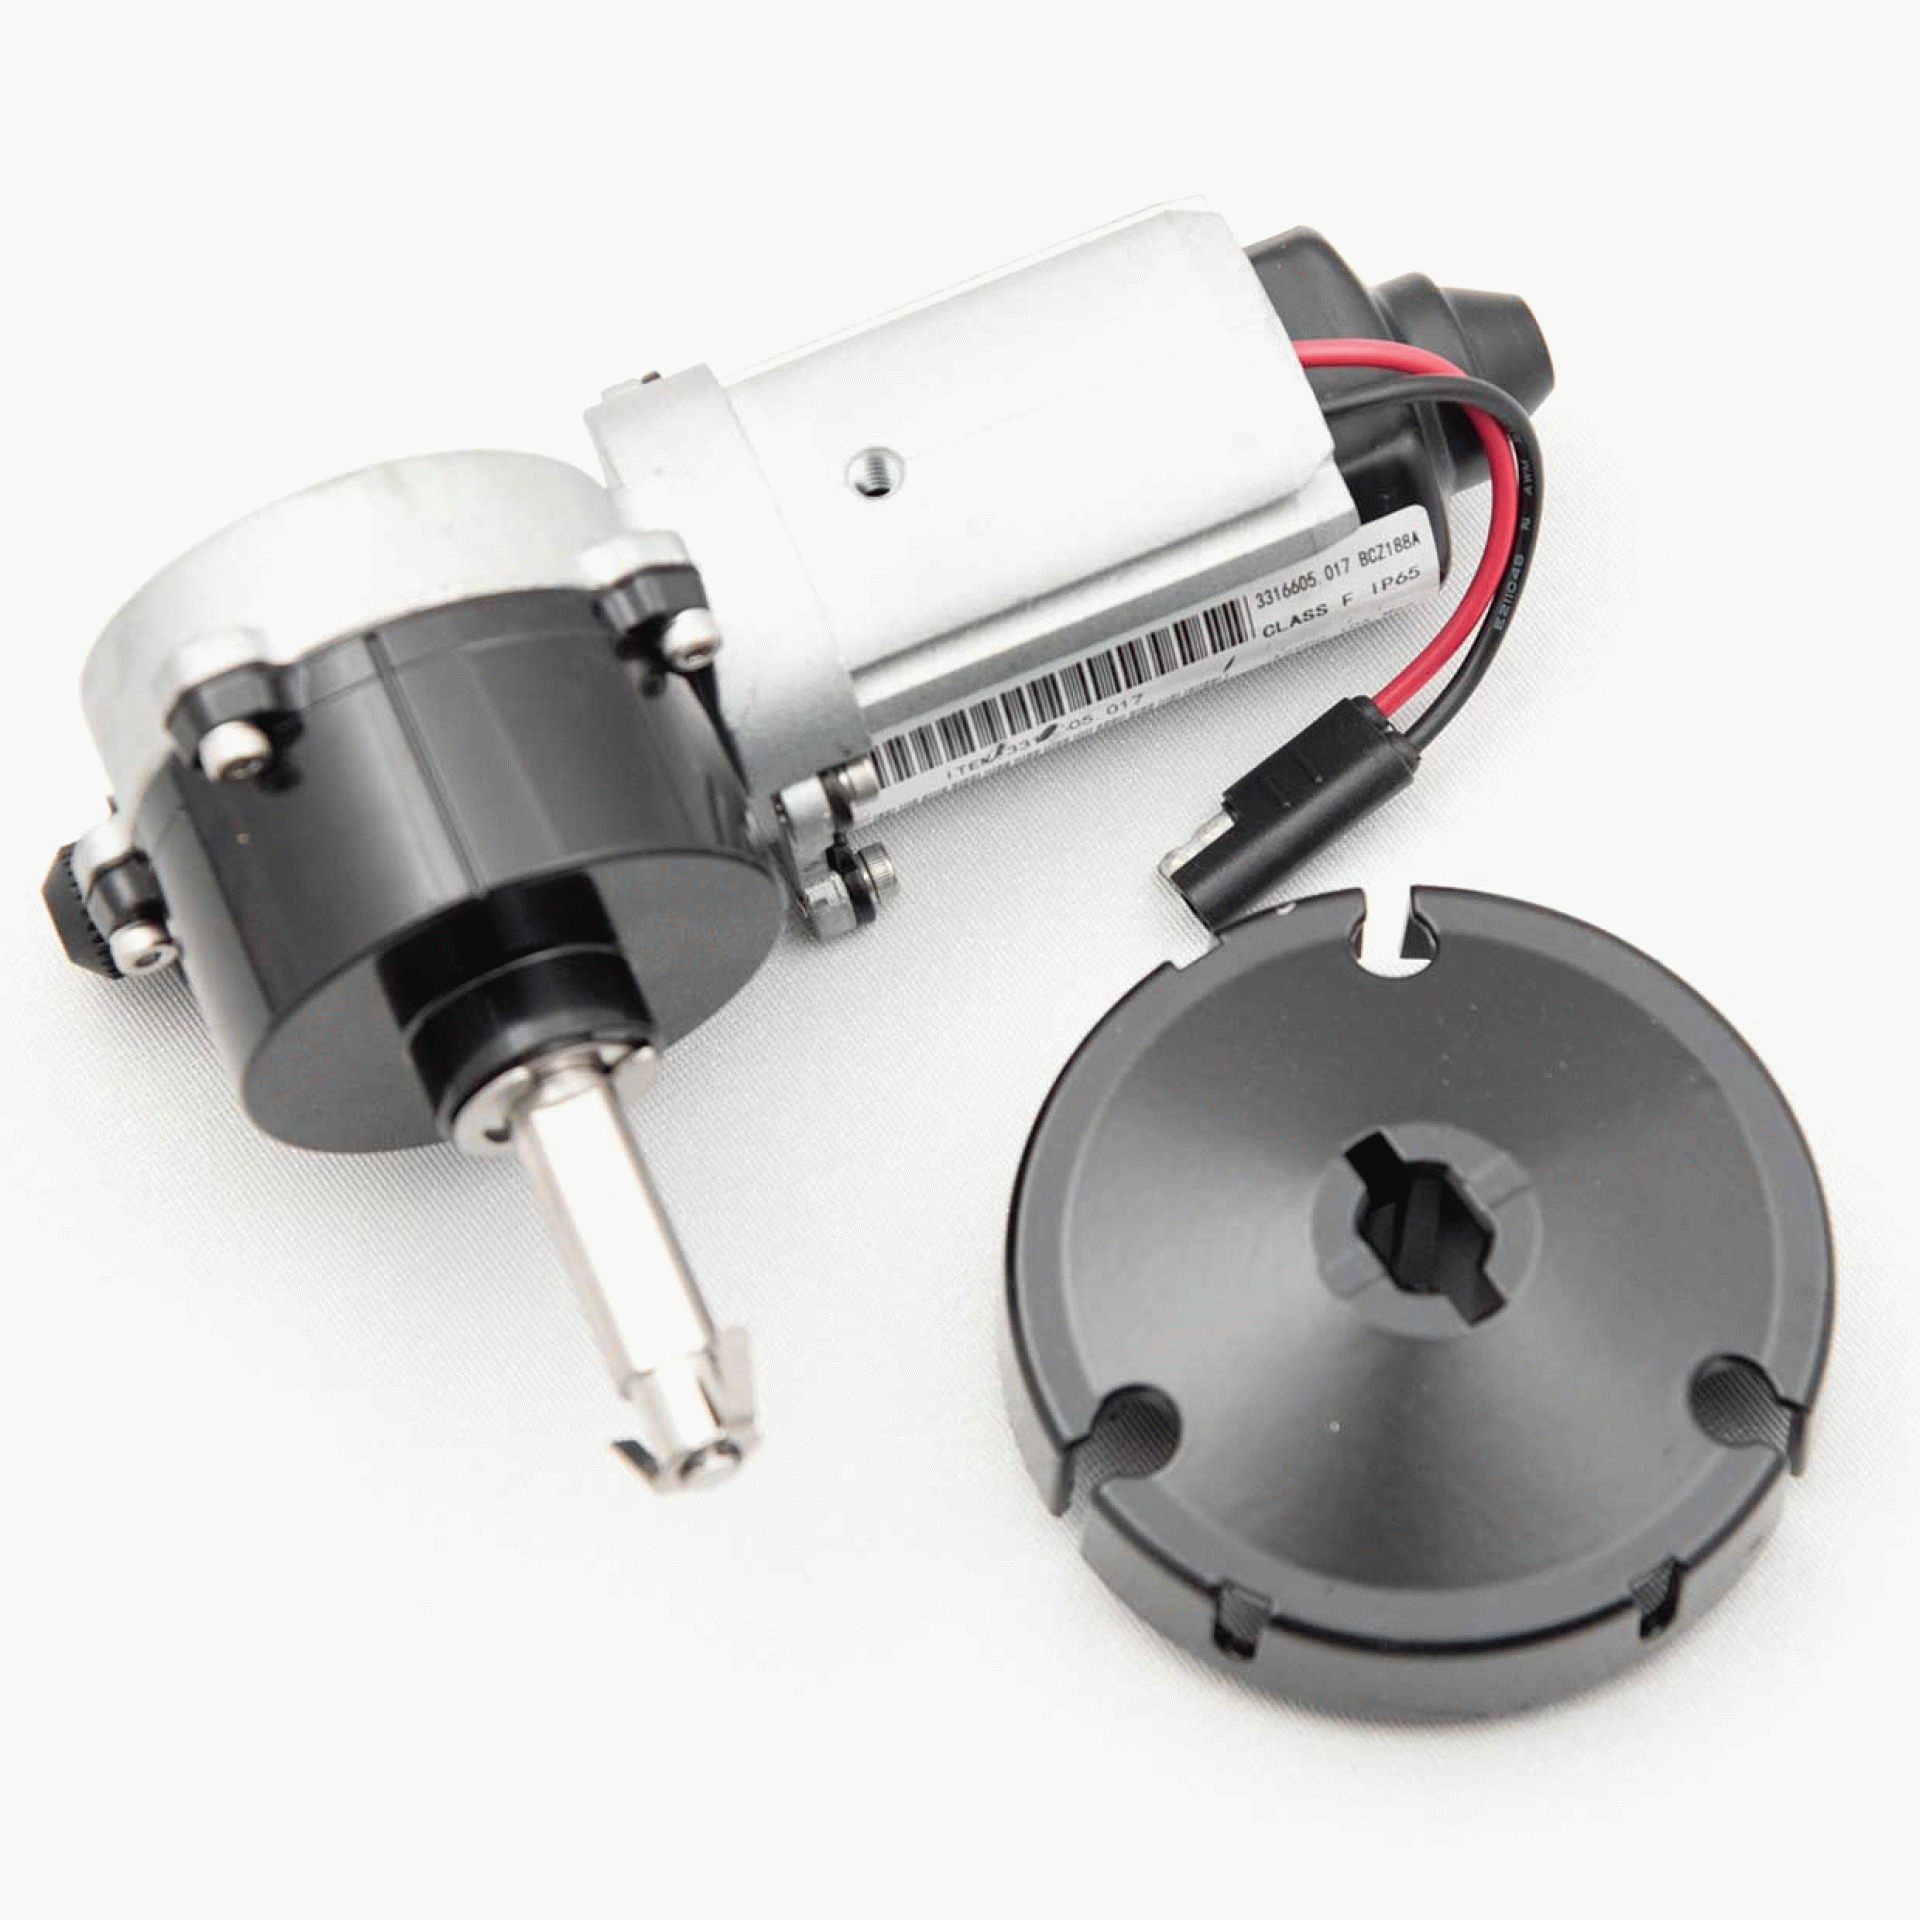 DOMETIC | 3317084.000U | Dometic Replacement Awning Motor Drive Kit